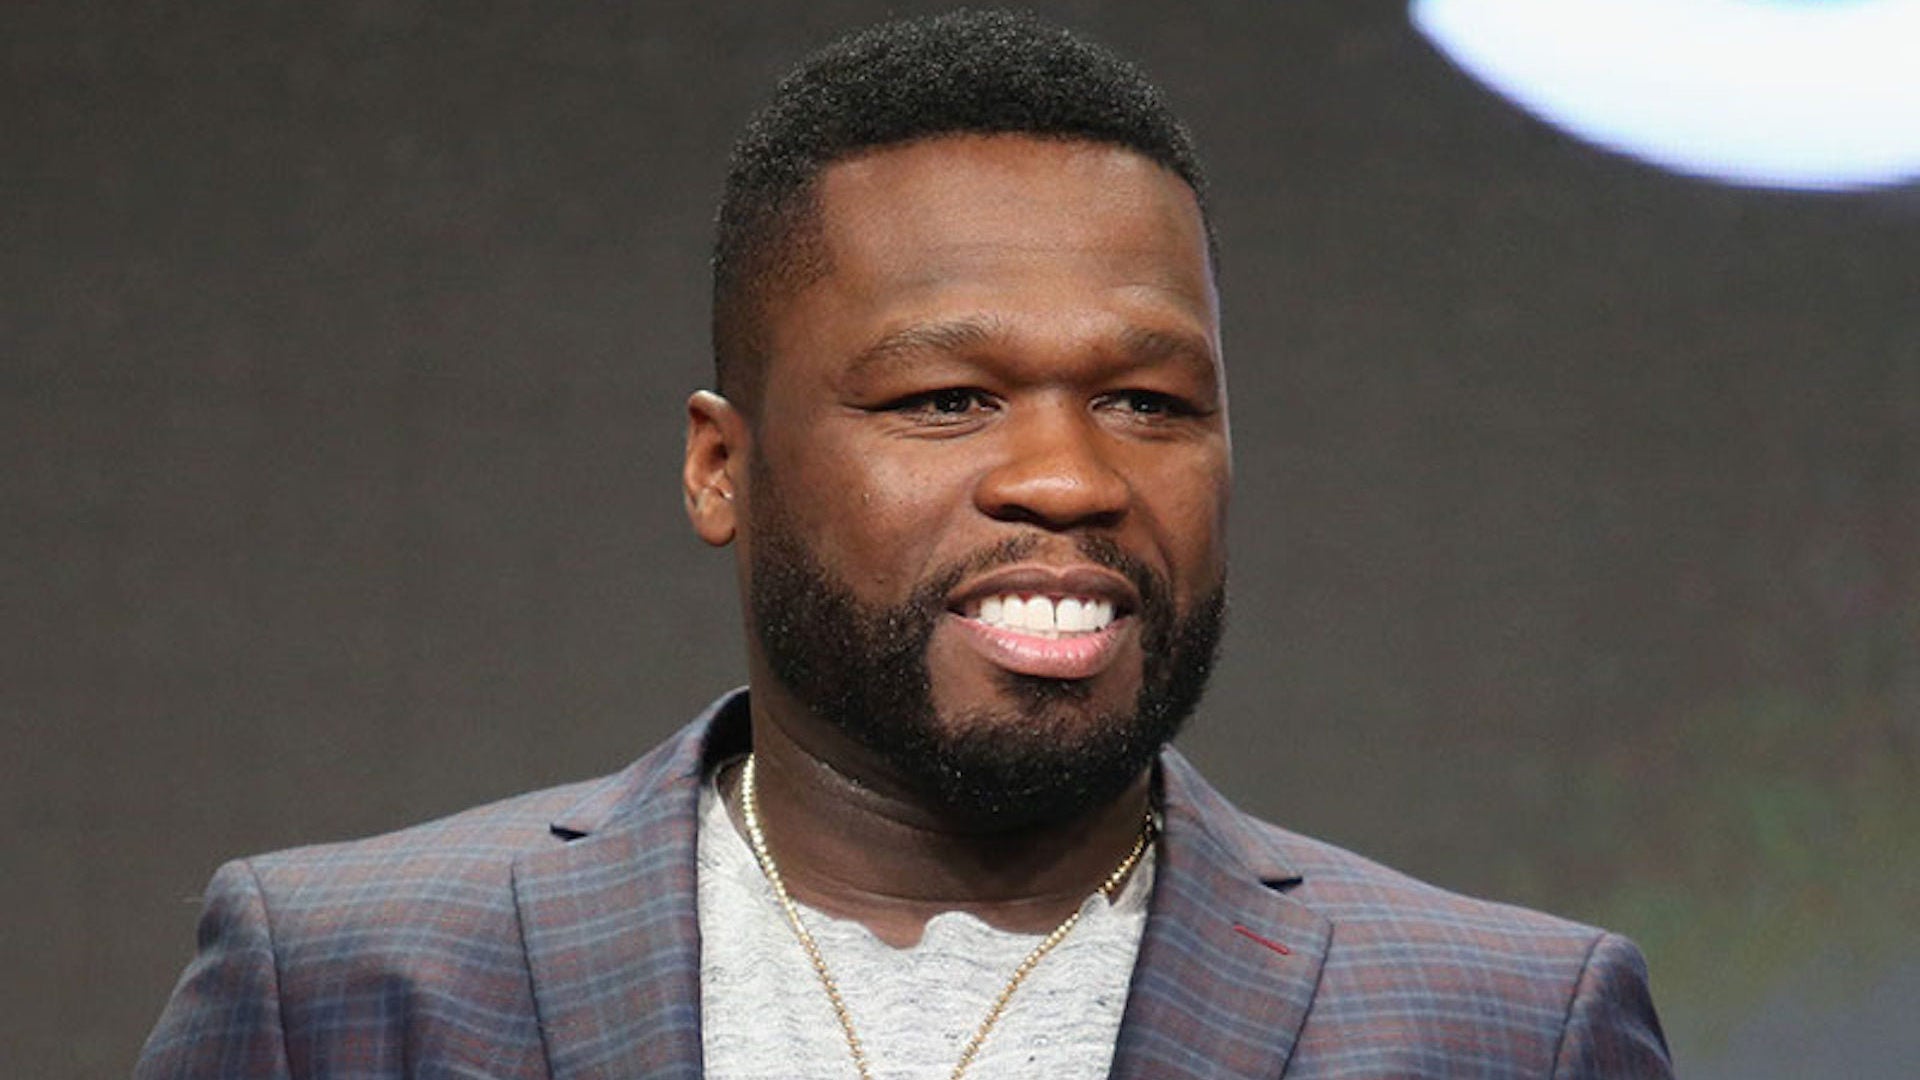 50 Cent Accuses Oprah Winfrey Of 'Going After Black Men' With Russell Simmons Documentary